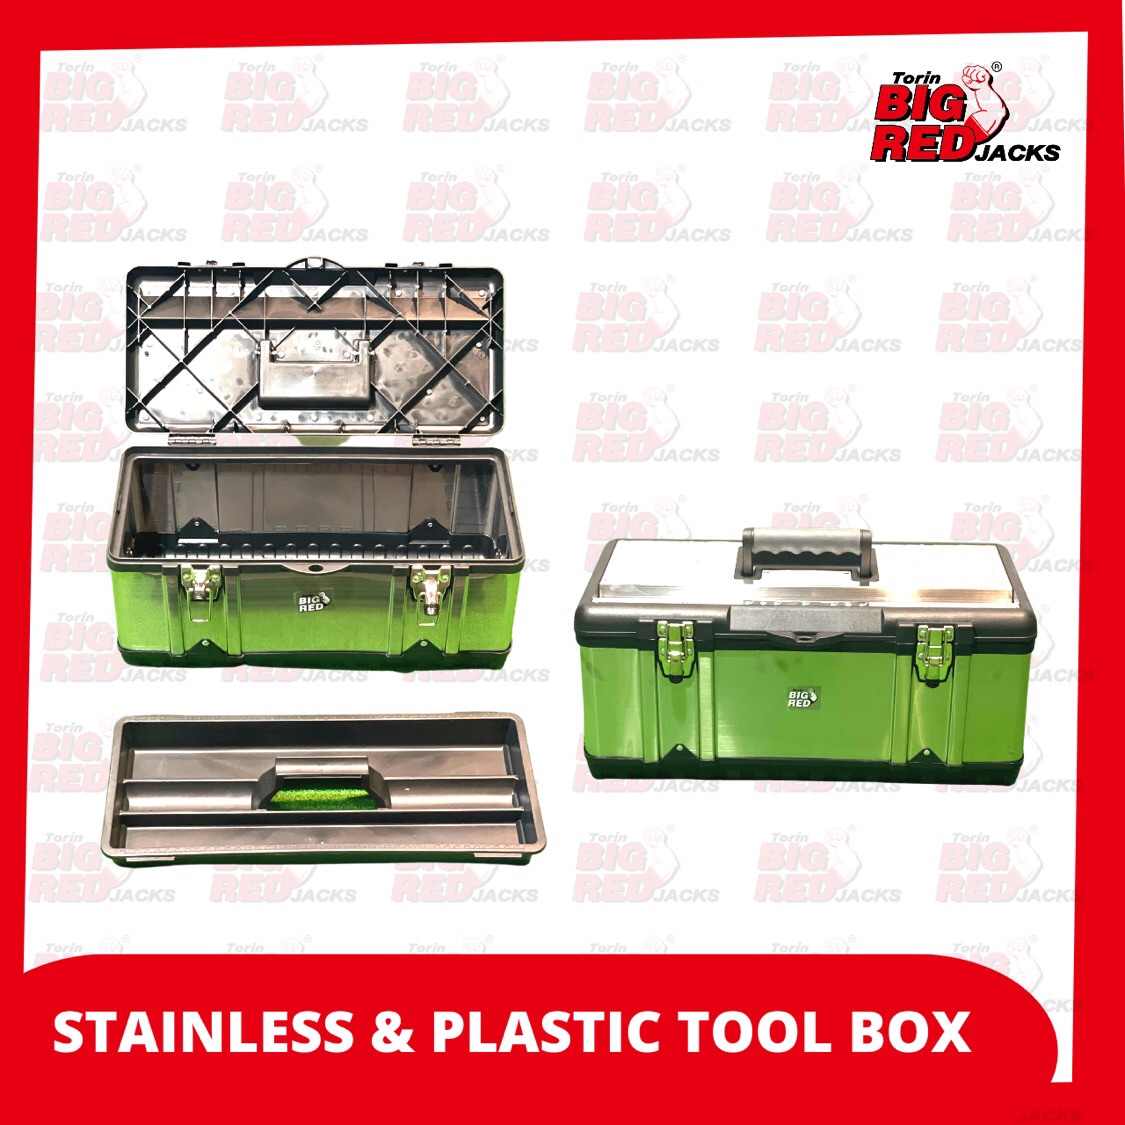 Big Red Stainless & Plastic Tool Box